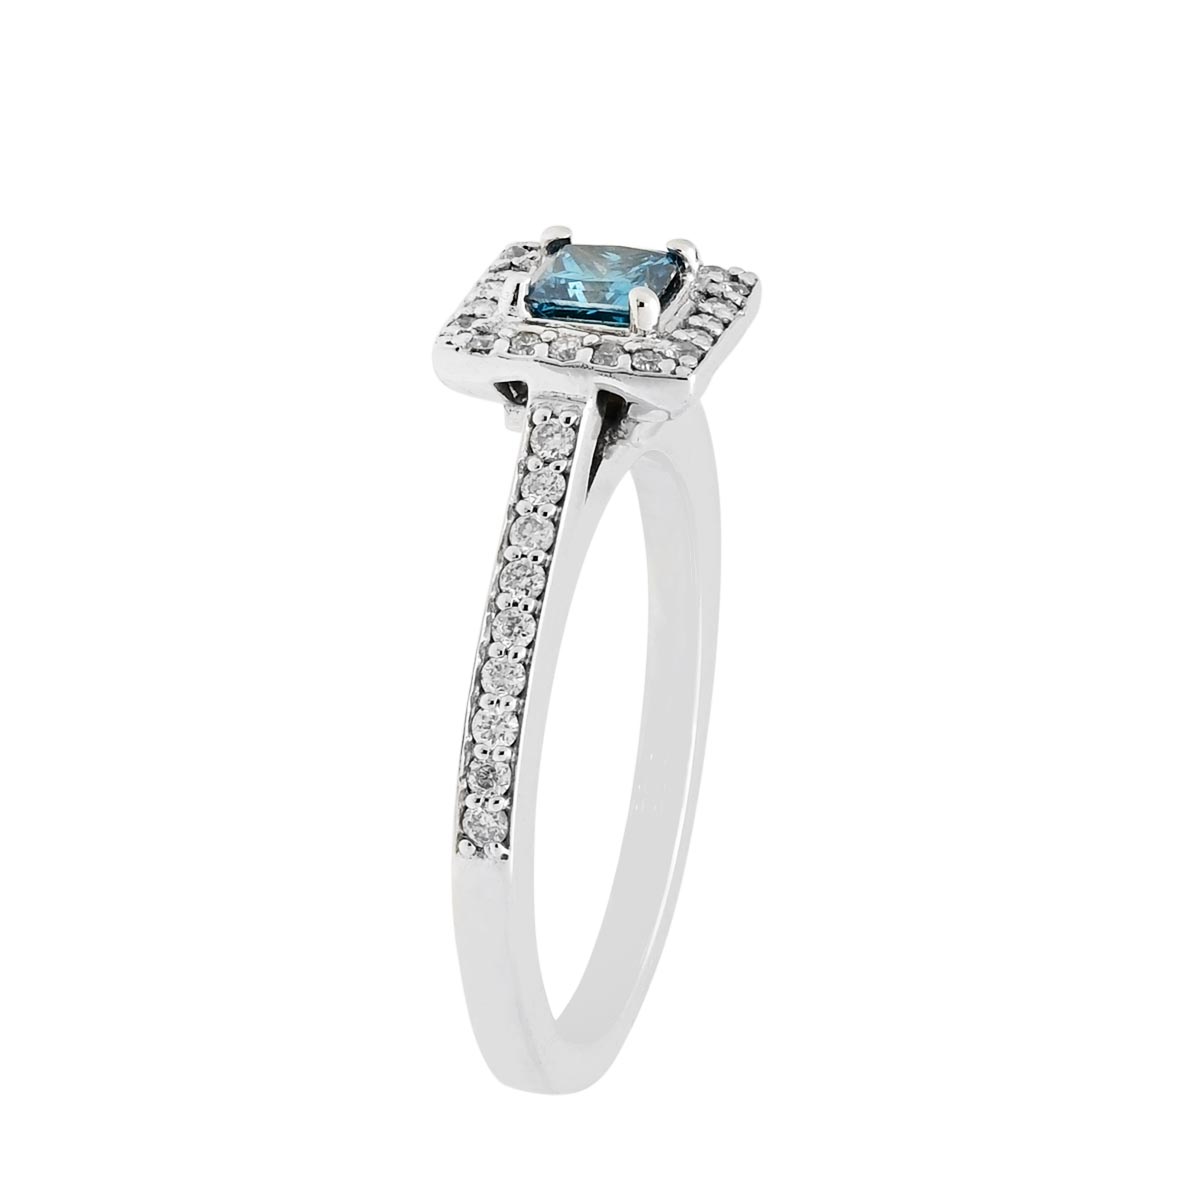 Princess Cut Blue Diamond Halo Engagement Ring in 14kt White Gold (1/2ct tw)